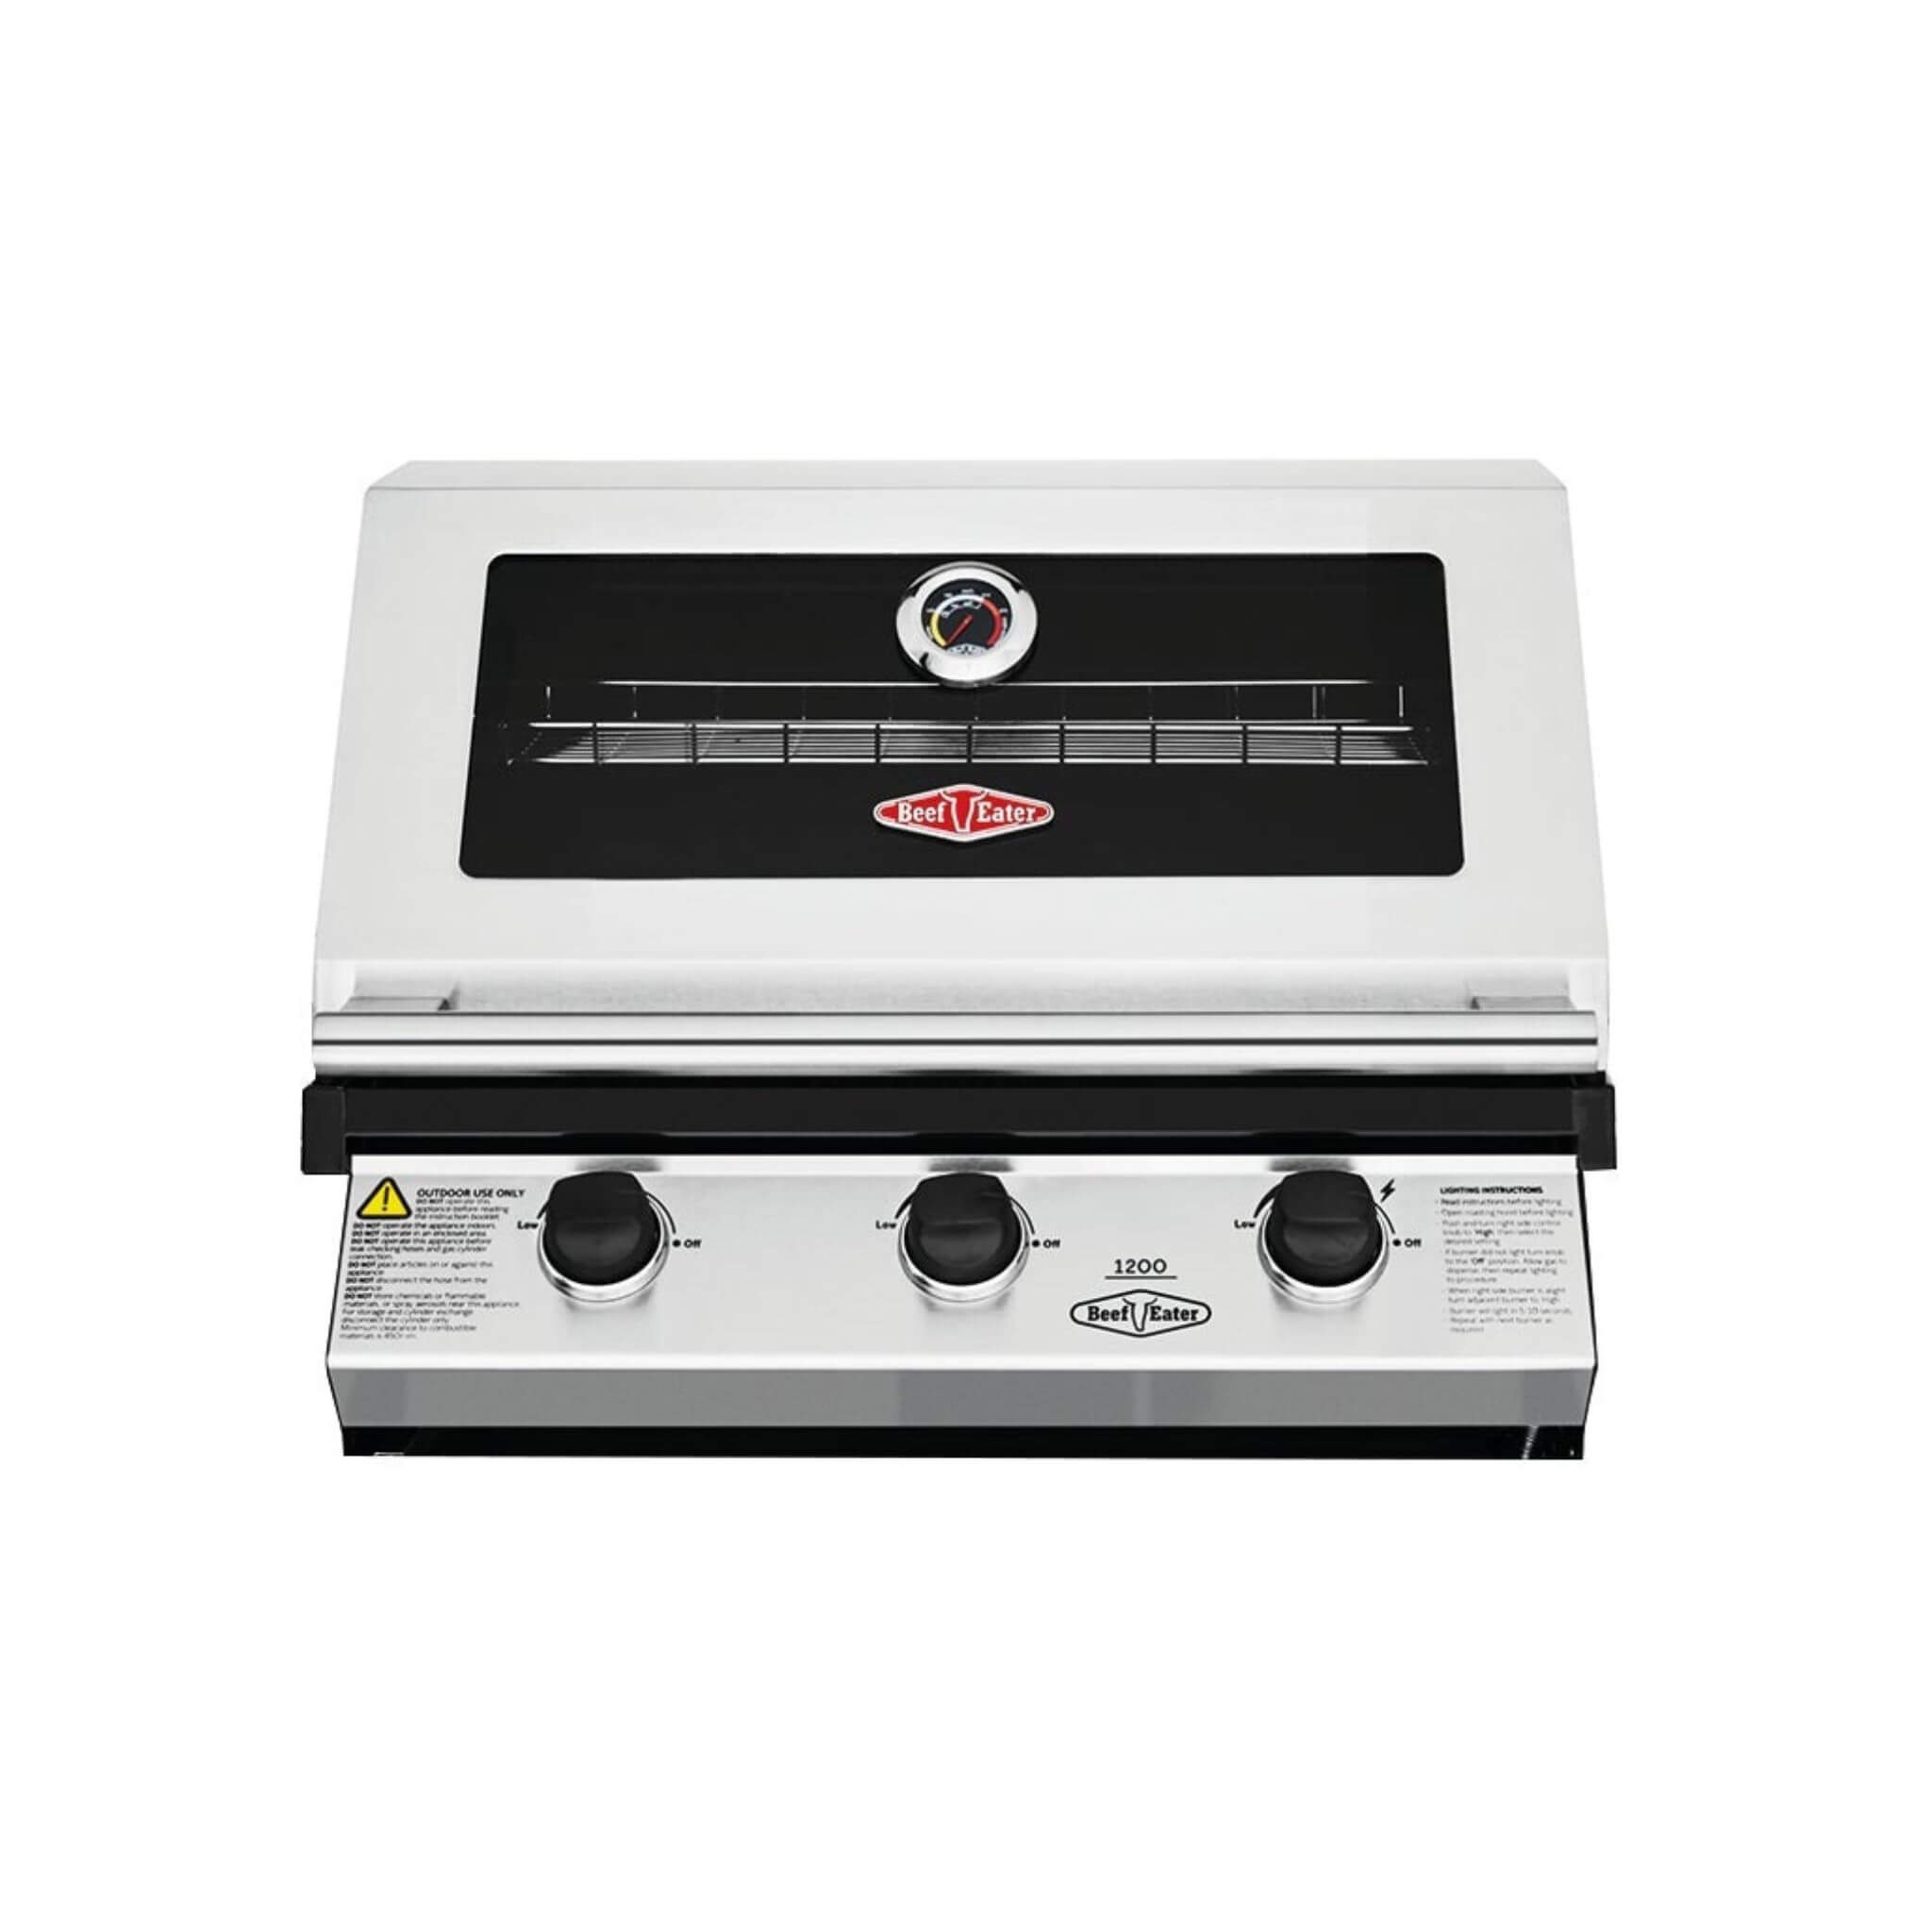 BeefEater Discovery 1200 Series - 3 Burner Built In Gas BBQ (Black Enamel or Stainless Steel)